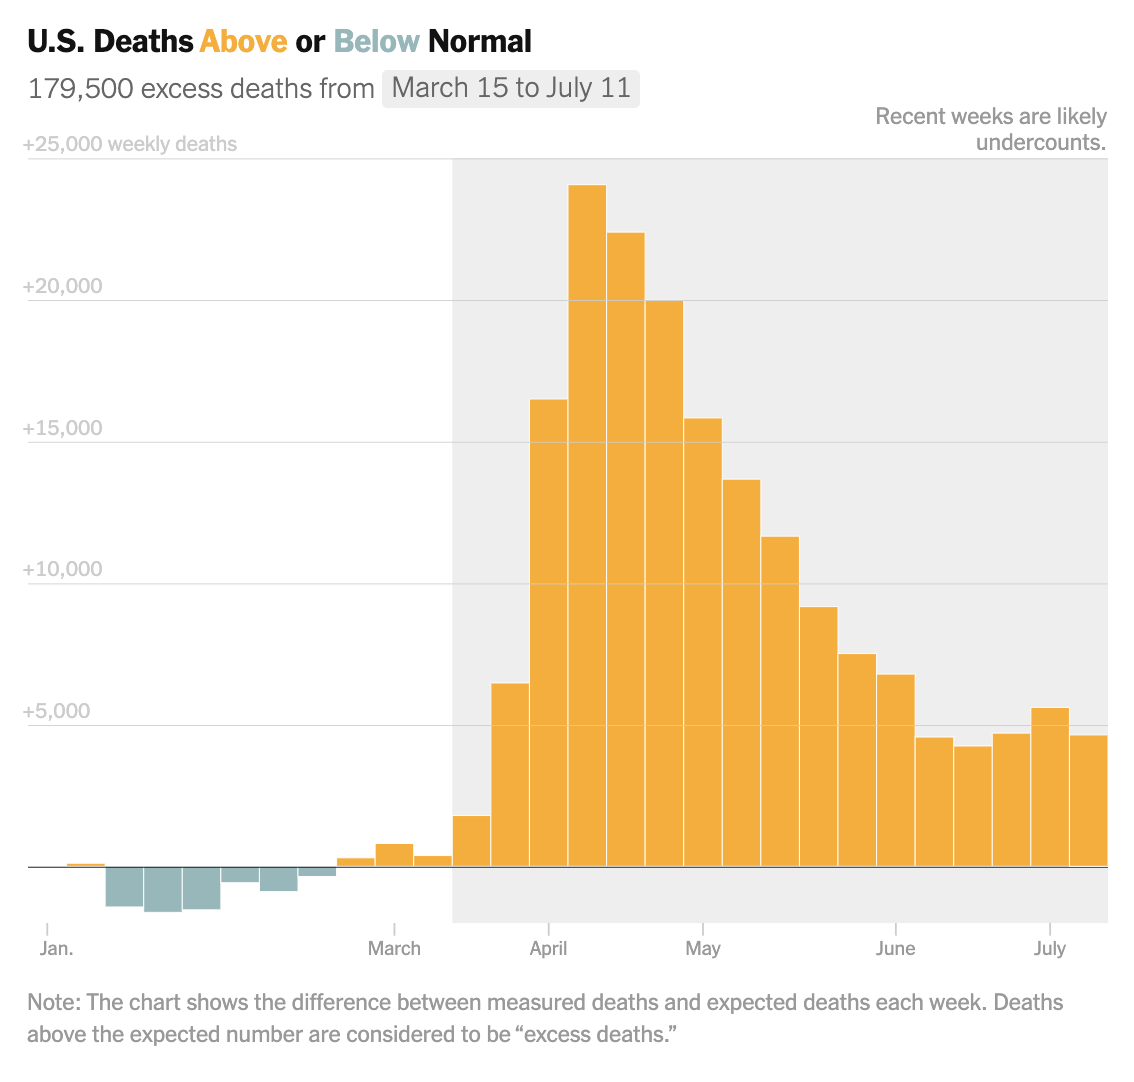 Since Covid arrived, 179,000 more Americans have died than would in a normal year.  https://www.nytimes.com/interactive/2020/05/05/us/coronavirus-death-toll-us.html  @DeniseDSLu  @jshkatz